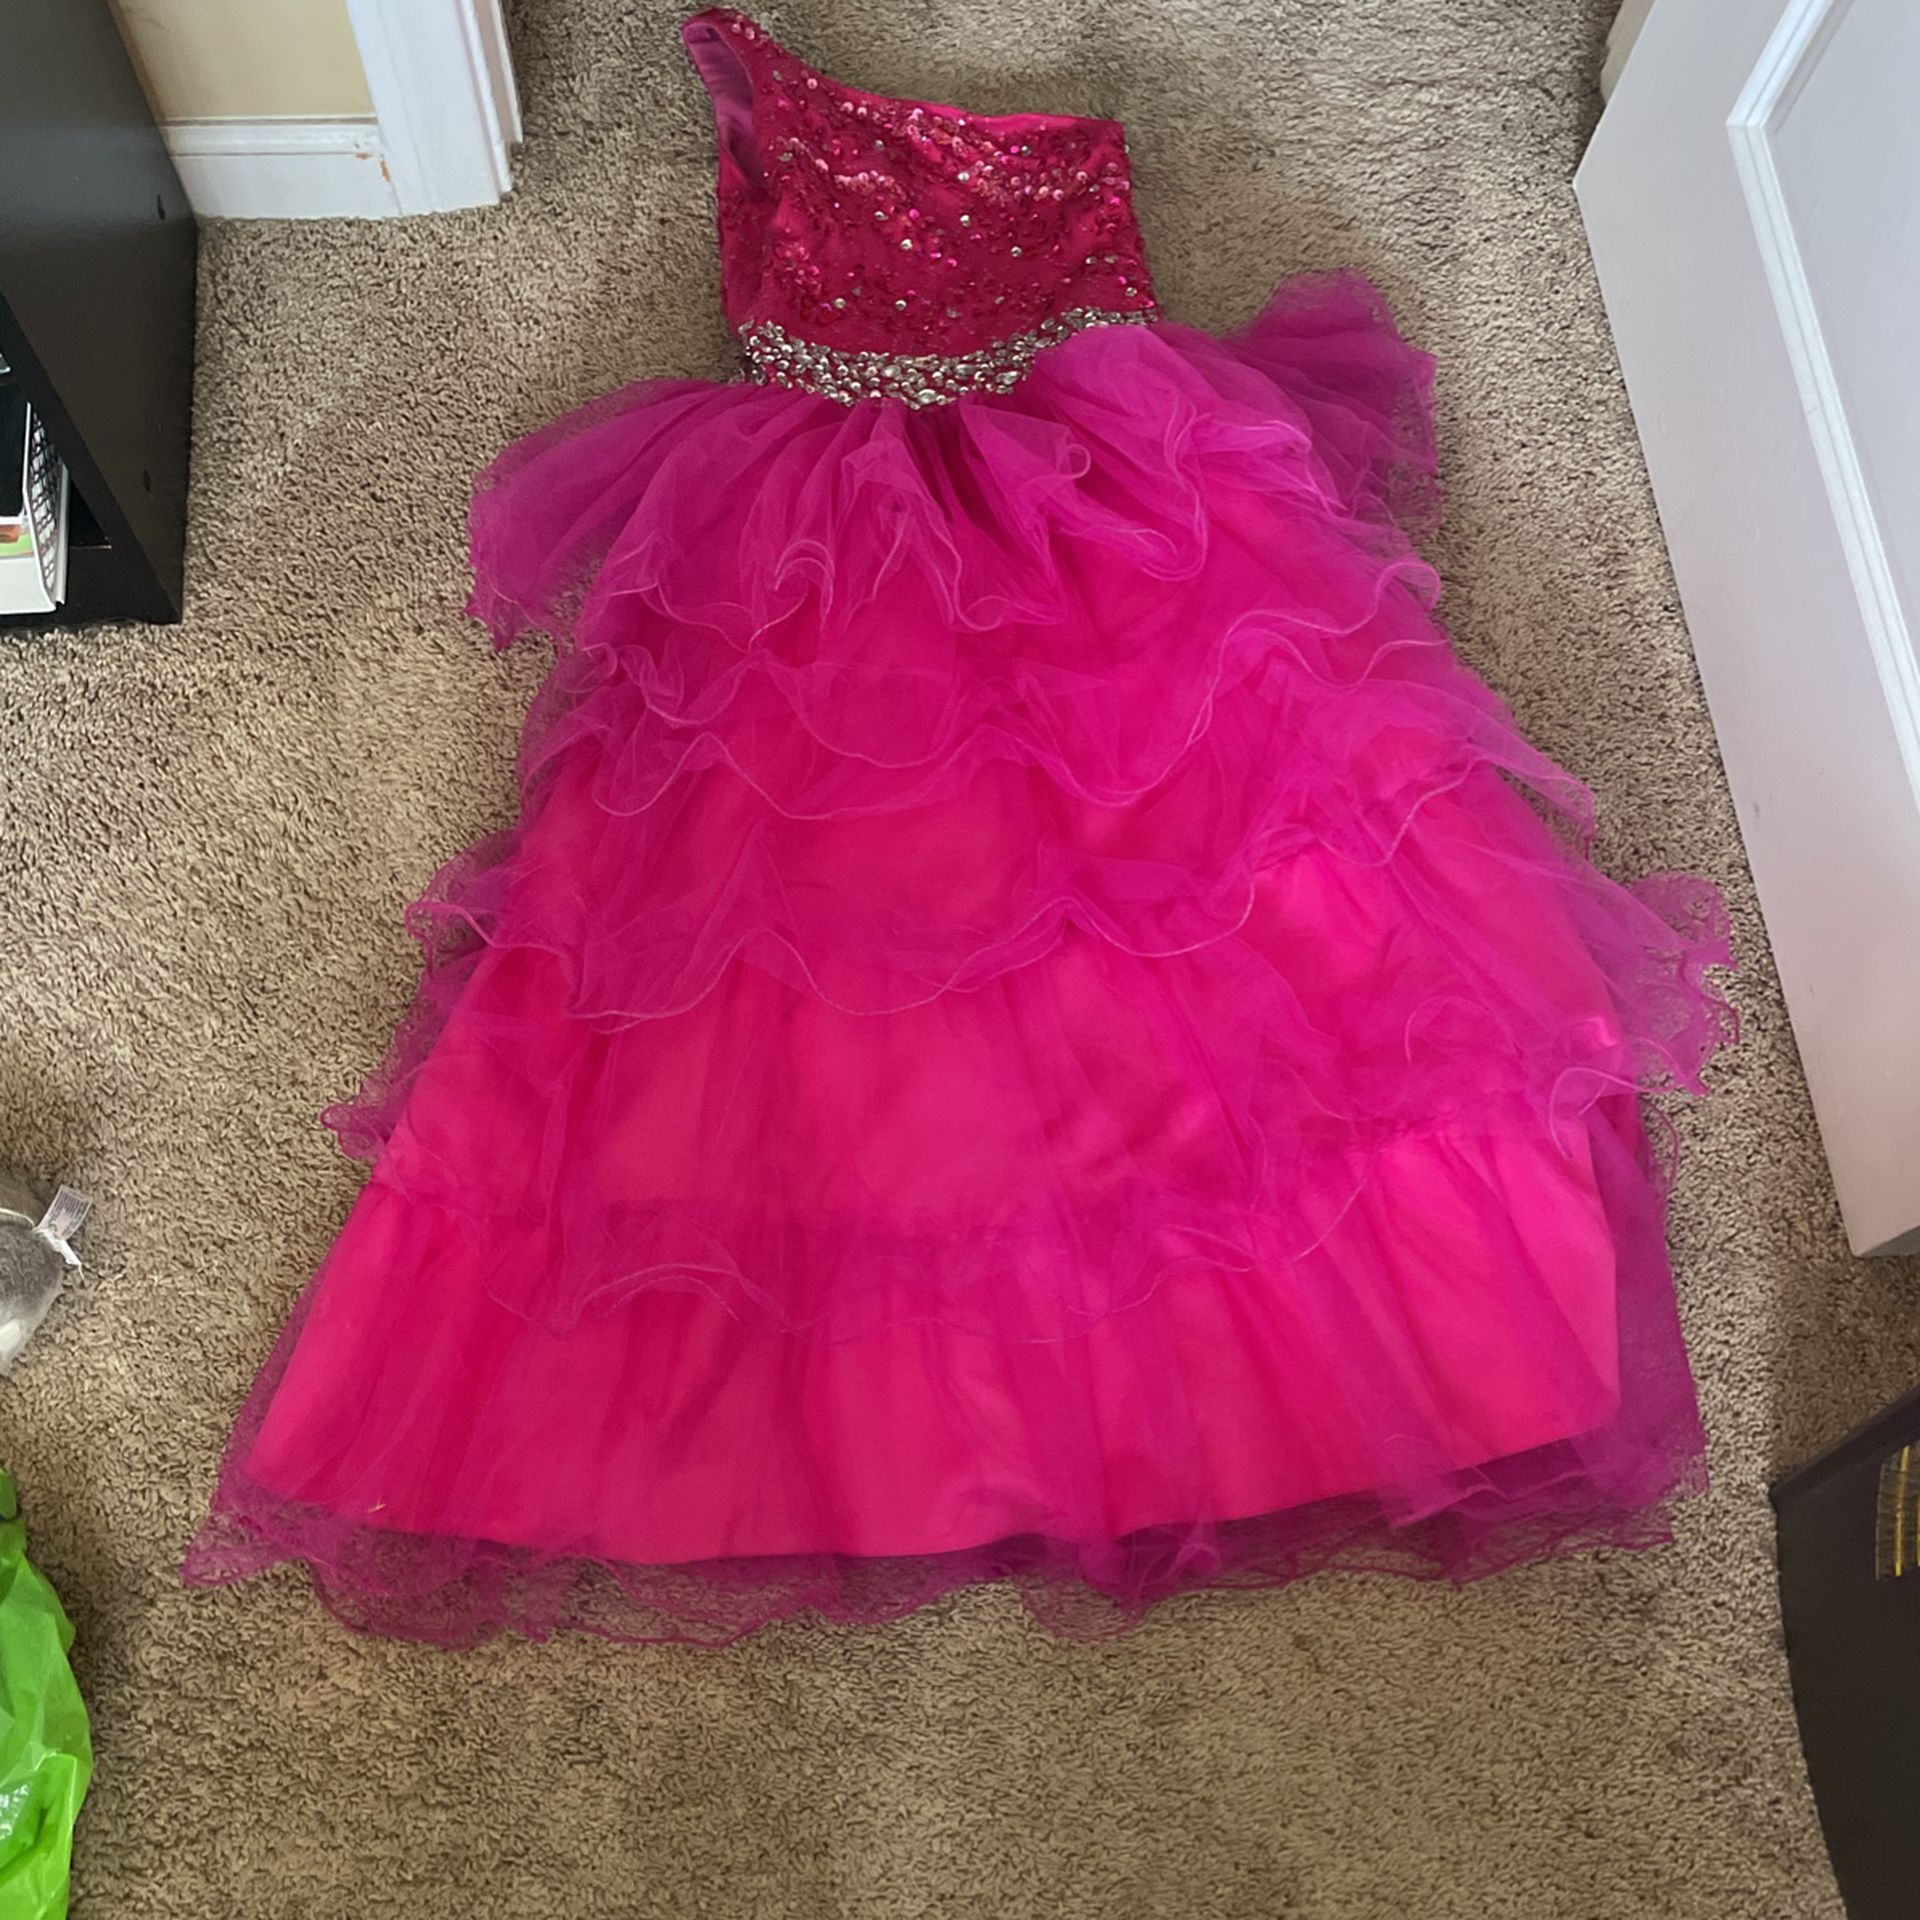 magenta pink kids dress with silver rhinestones and ruffles, wore this when i was 10 w